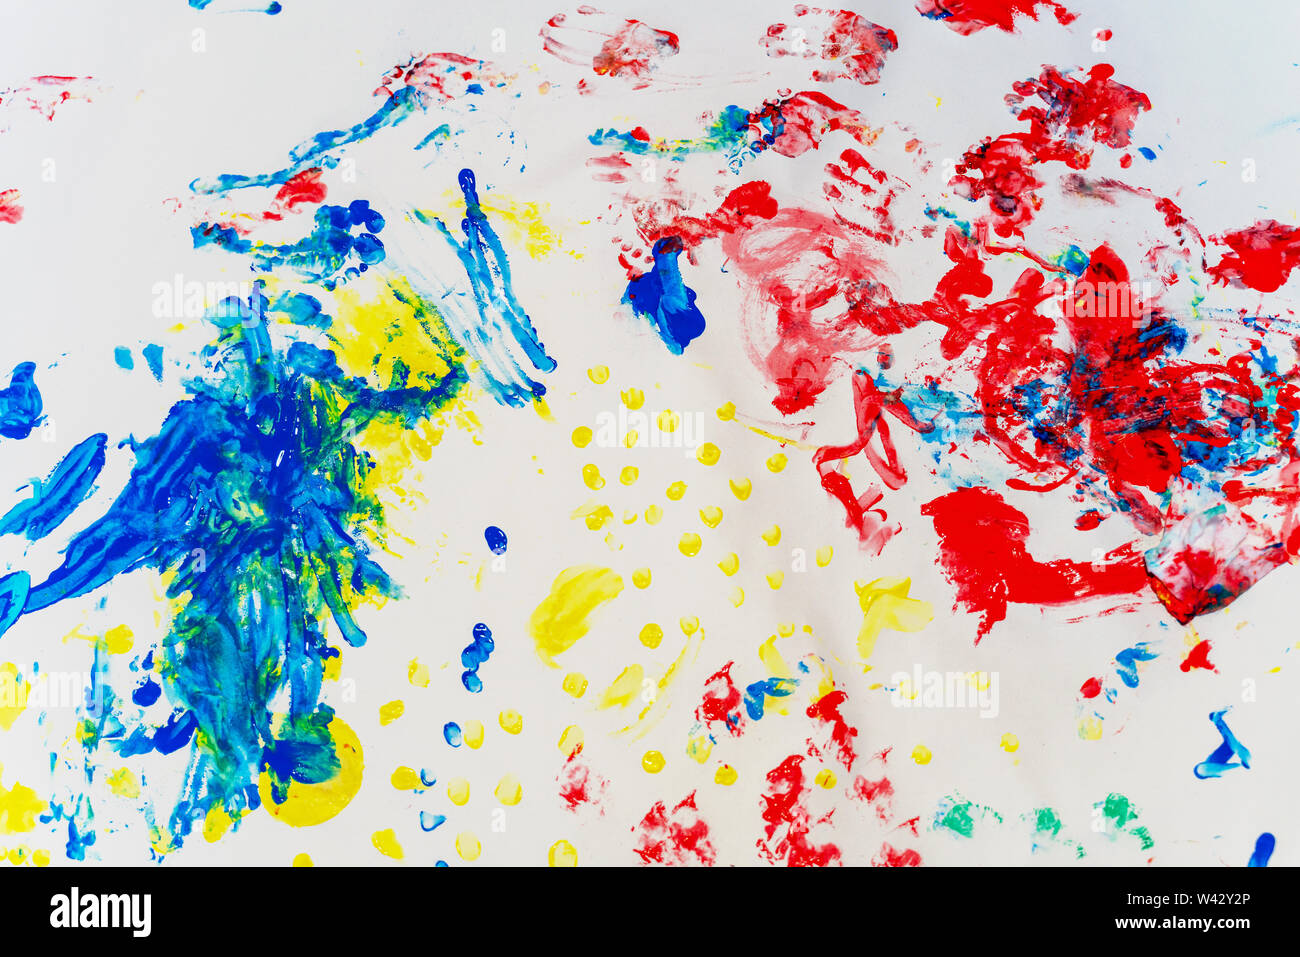 Wallpaper painted by a baby with finger paintings Stock Photo